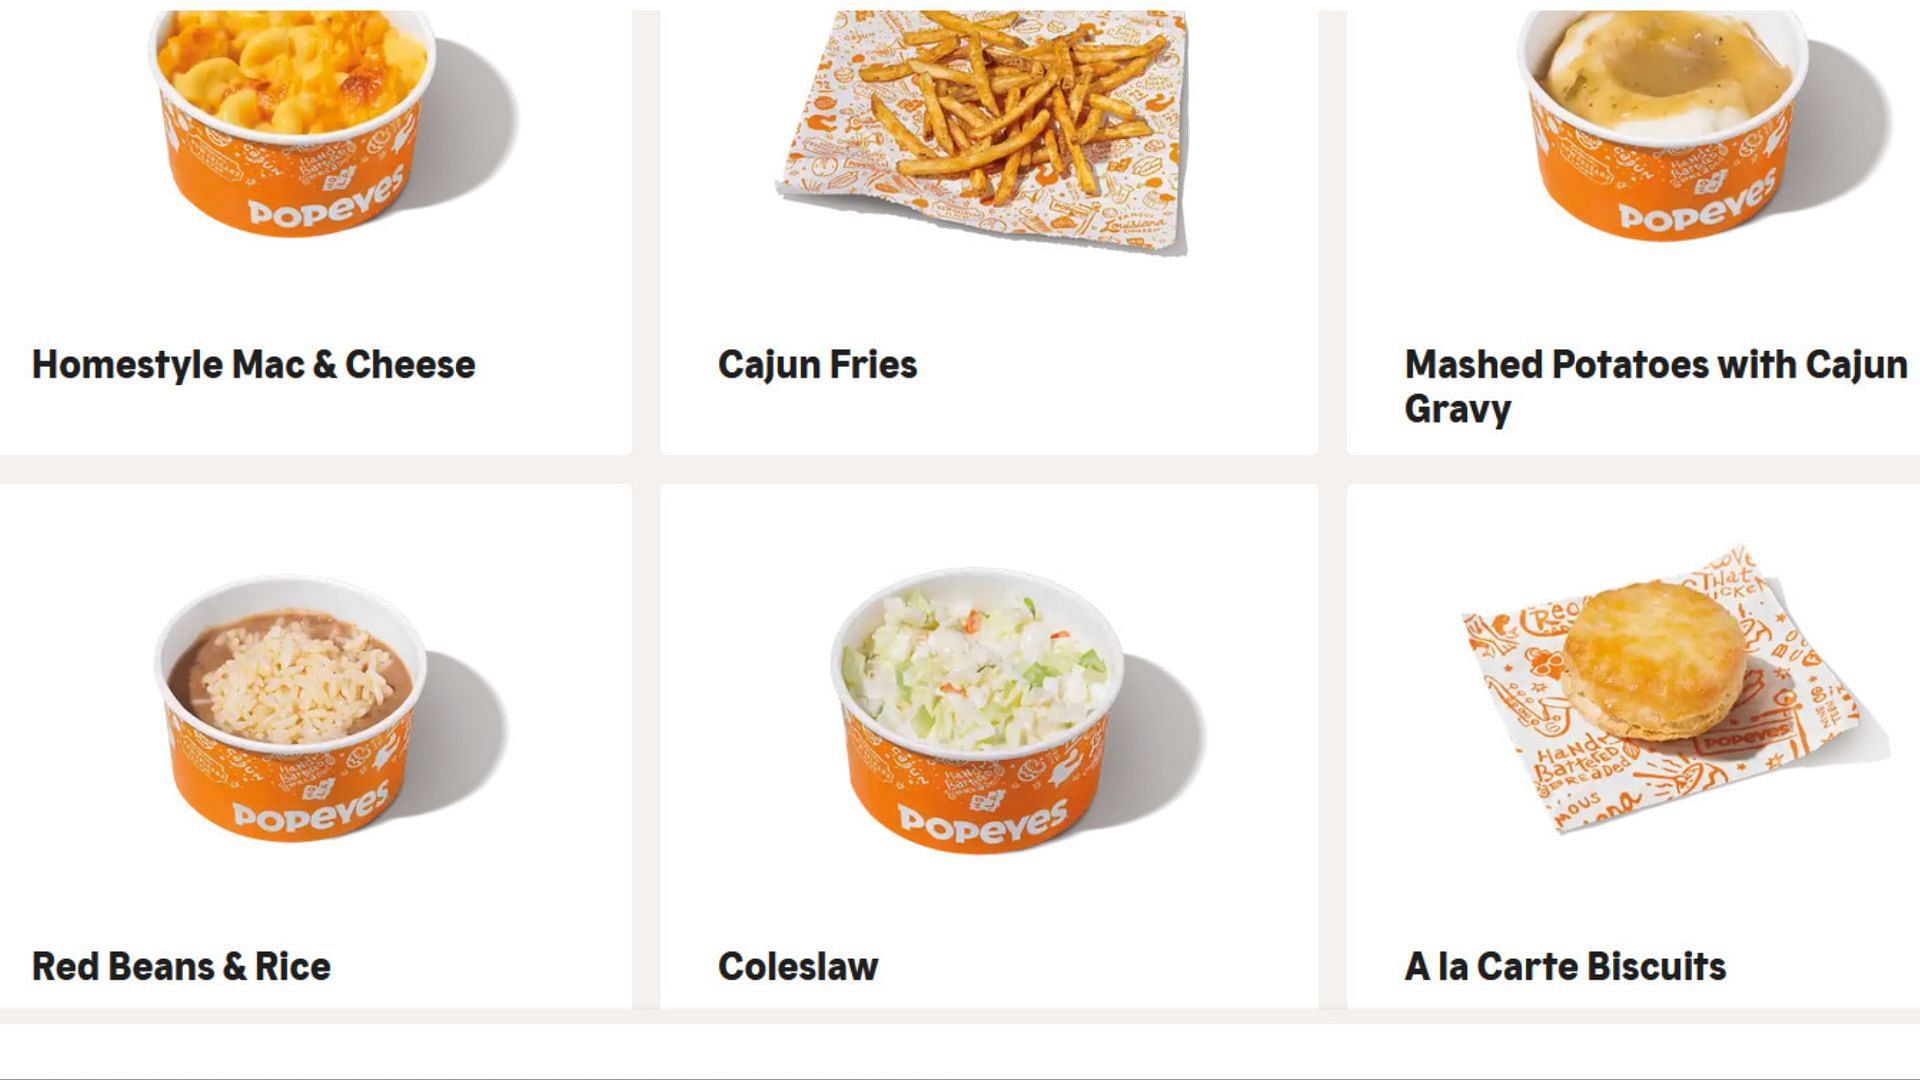 These items can be customised (Image via Popeyes)